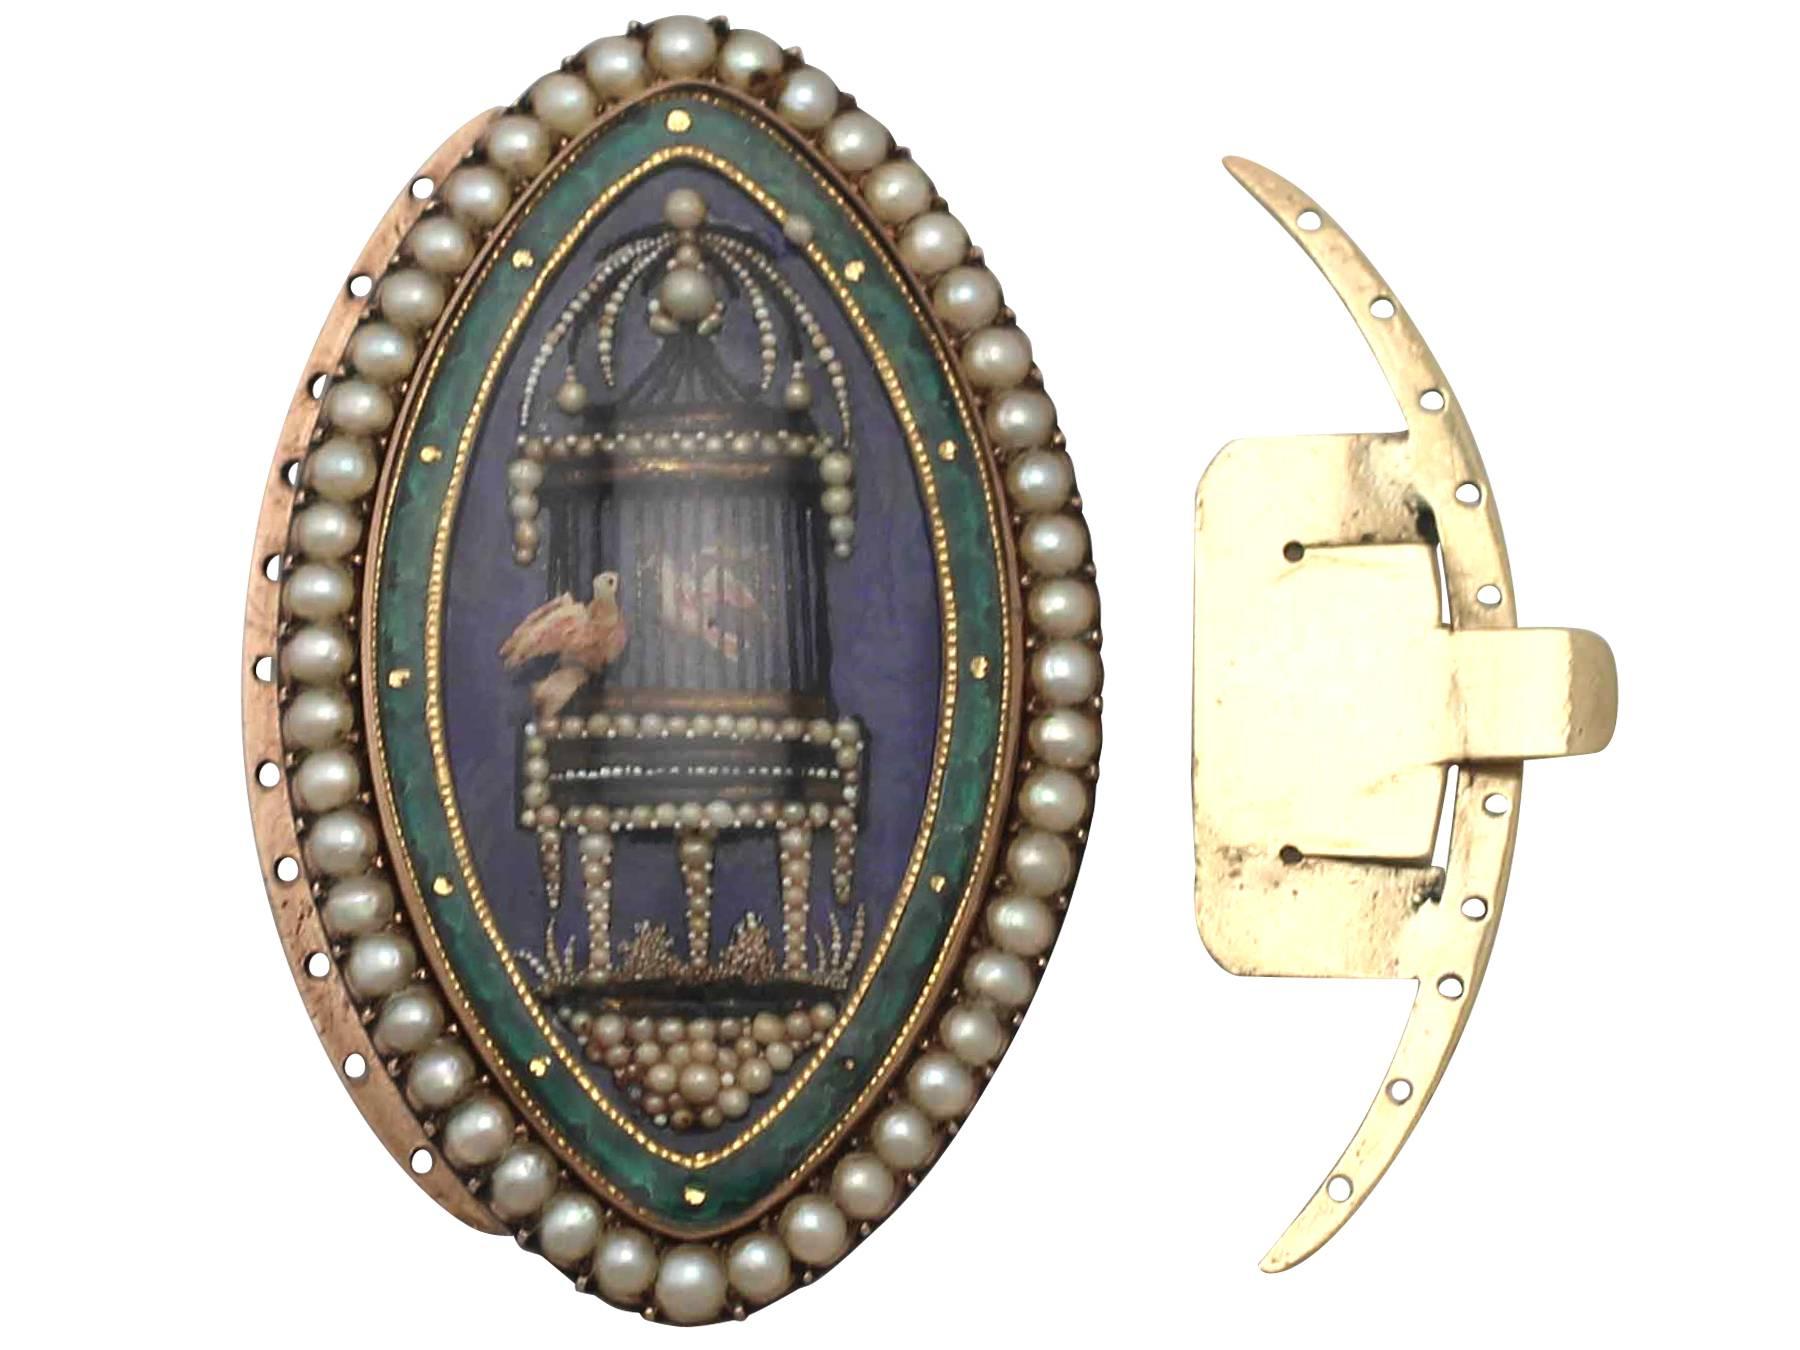 This exceptional, fine and impressive pearl necklace clasp has been crafted in 10k yellow gold and enamel.

The elliptical, subtly convex clasp displays a feature hand painted miniature enamel plaque depicting an ornate bird cage holding one bird,